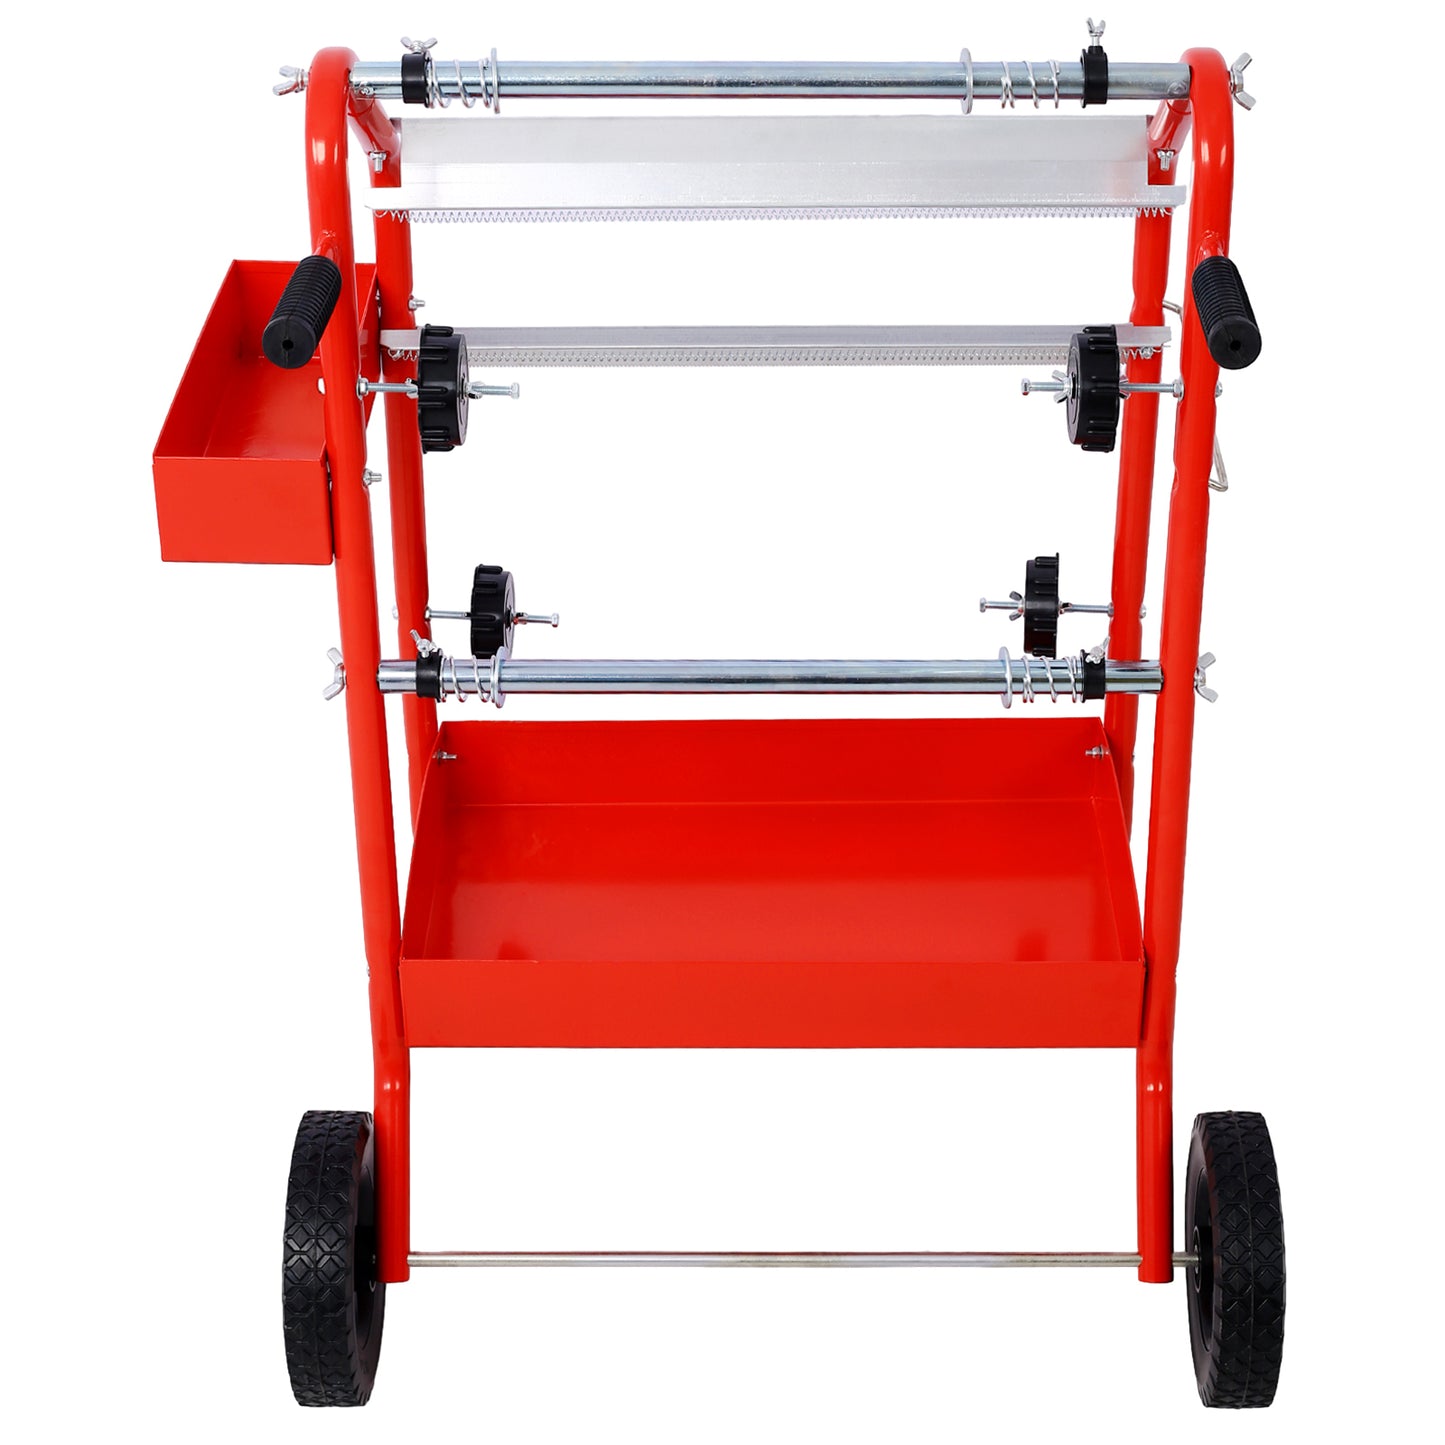 Mobile 18" Multi-Roll Masking Paper Machine with Storage Trays,RED